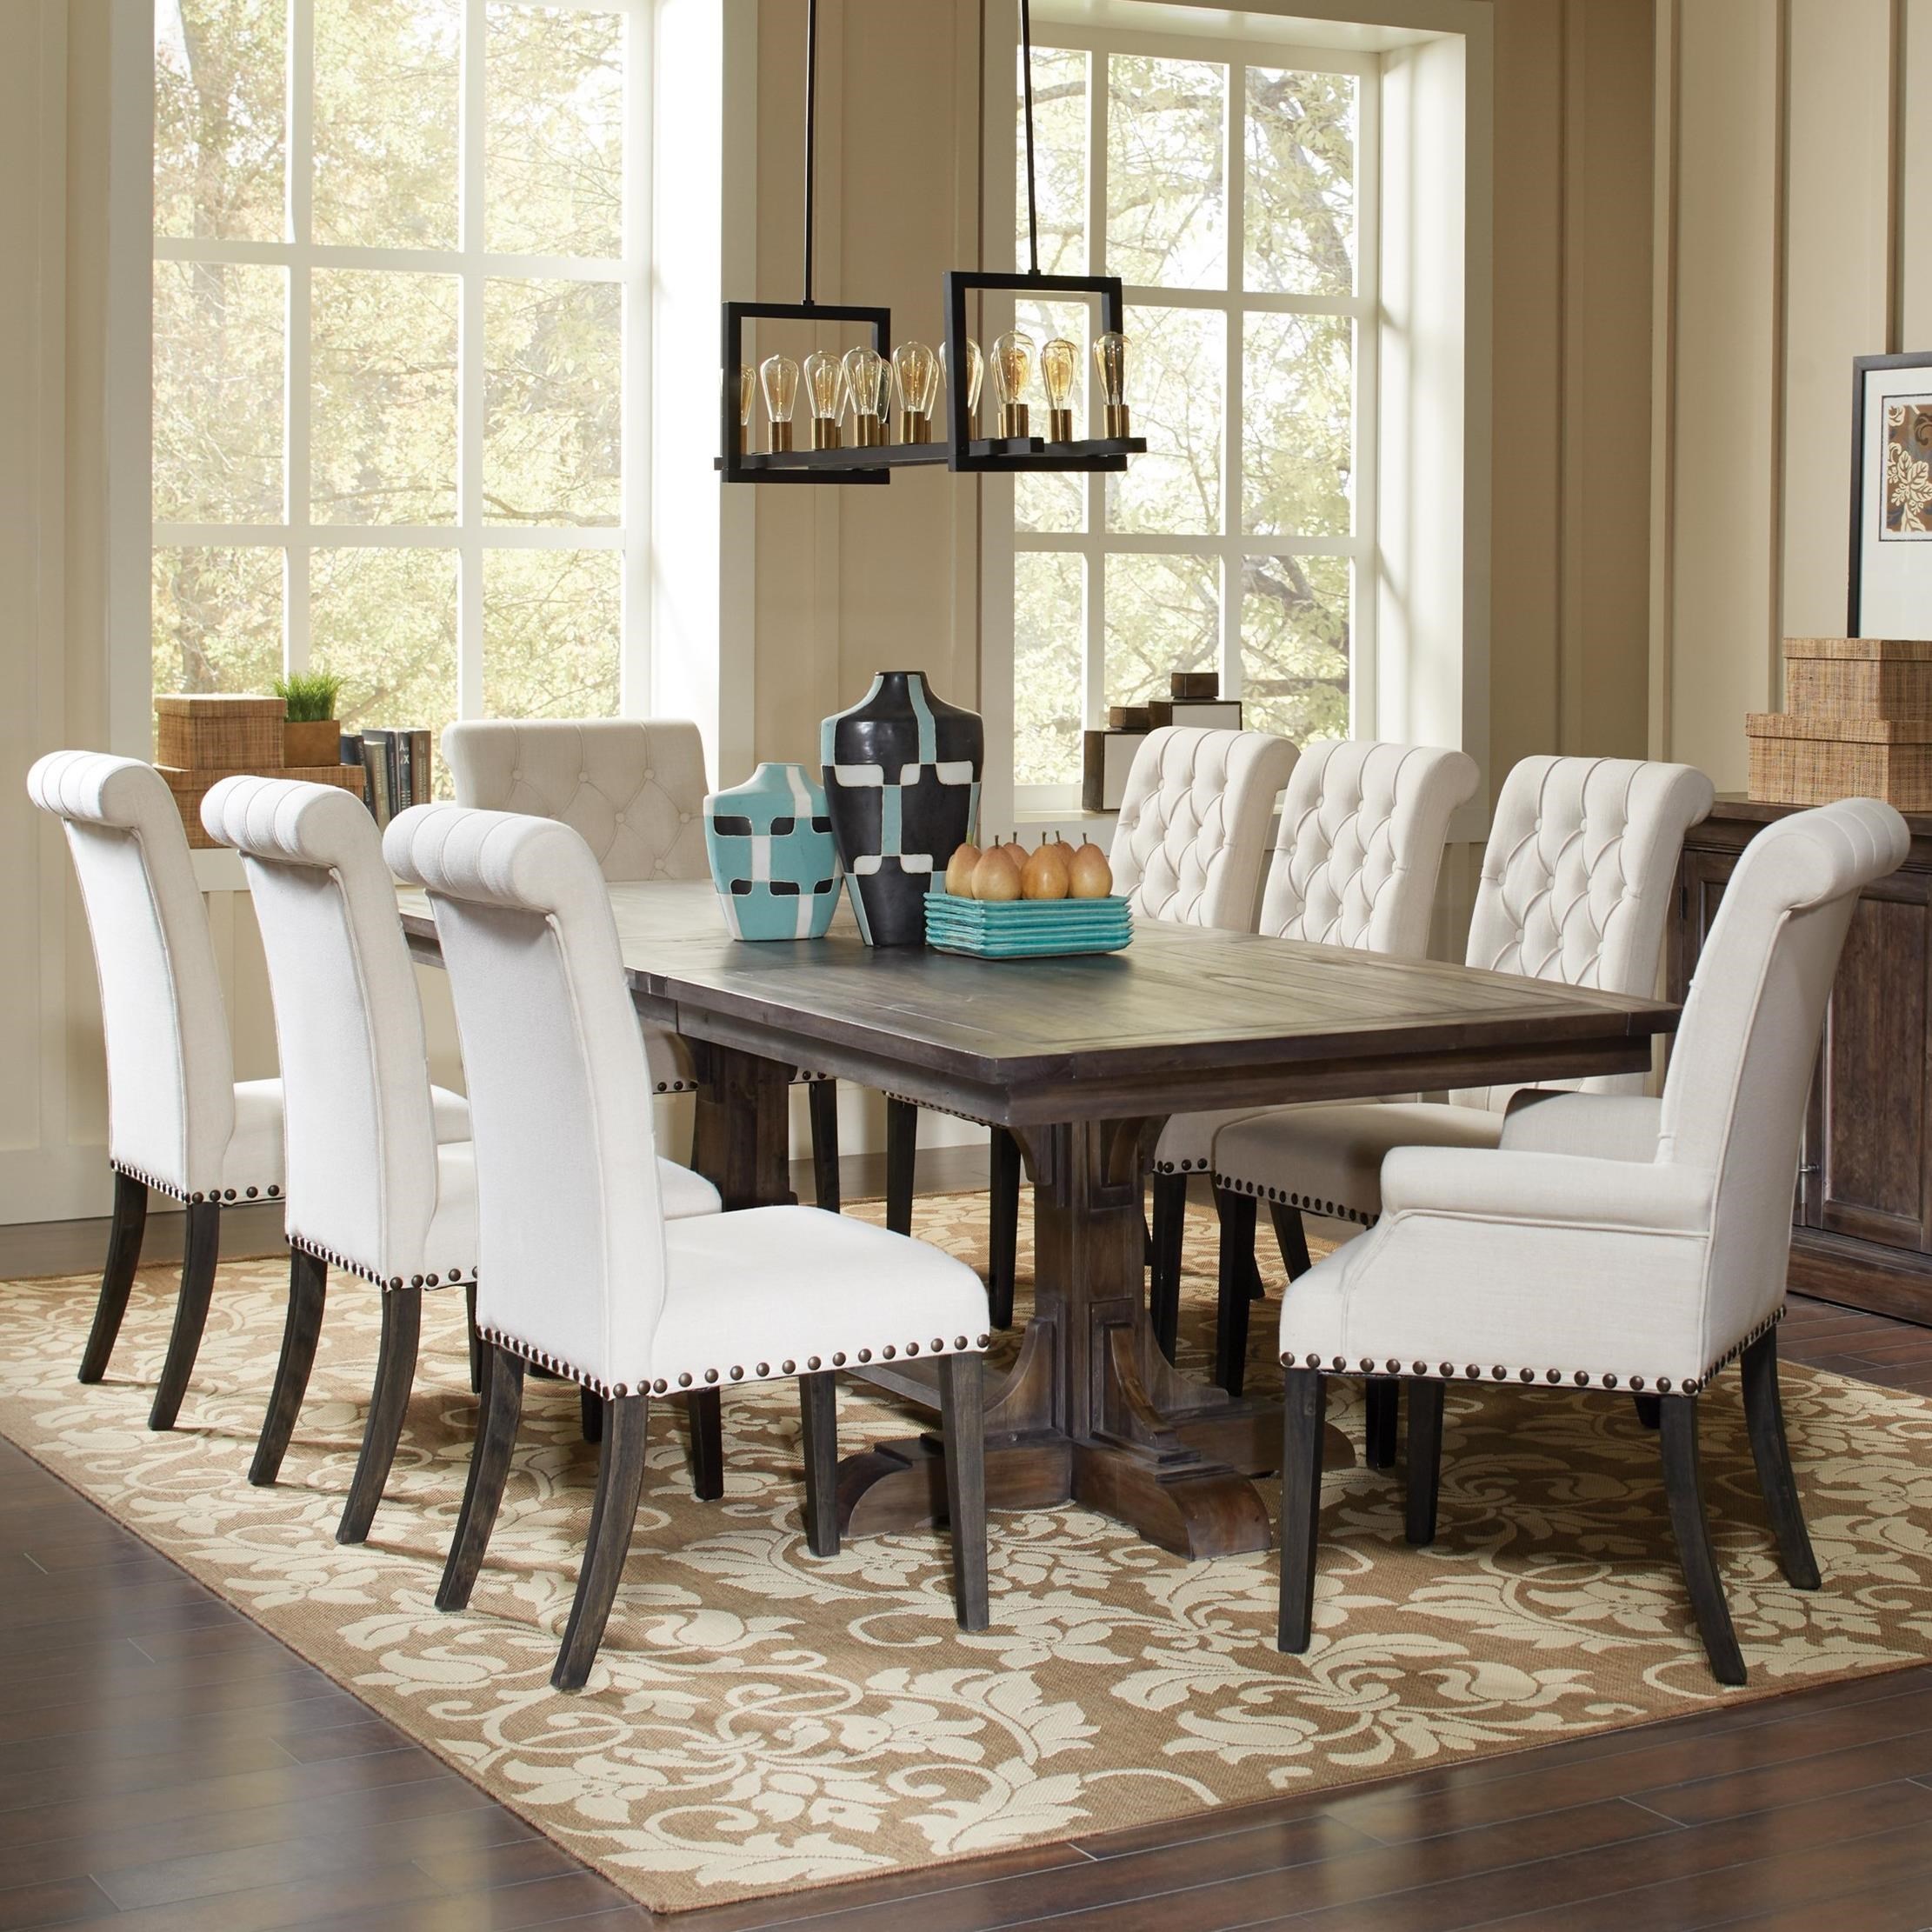 dining room table with upholstered chairs coaster weber traditional dining table and cream upholstered chair set XDJWYZK